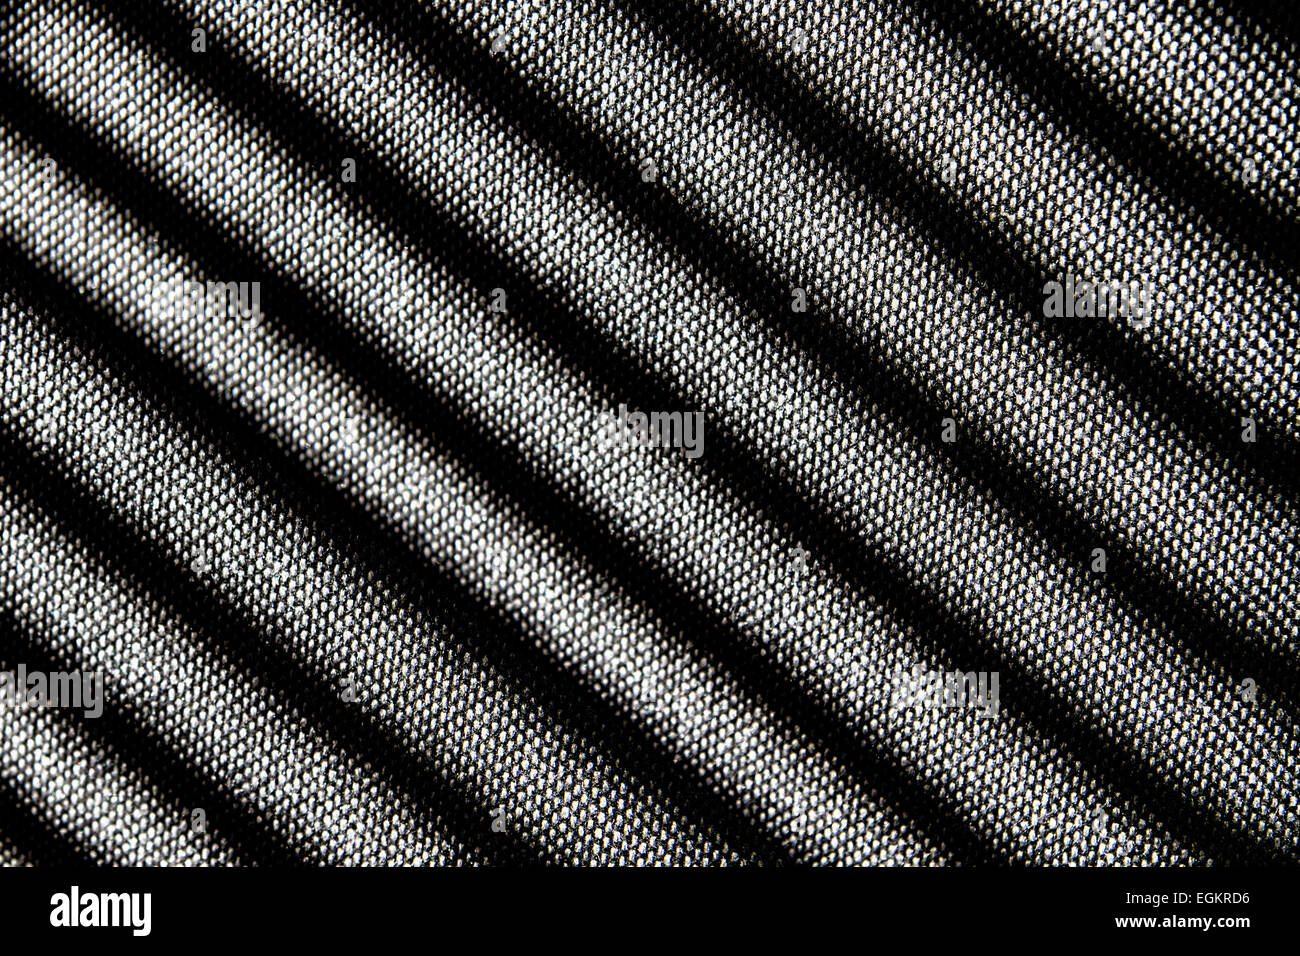 Shadow pattern from a venetian blind on a chair Stock Photo